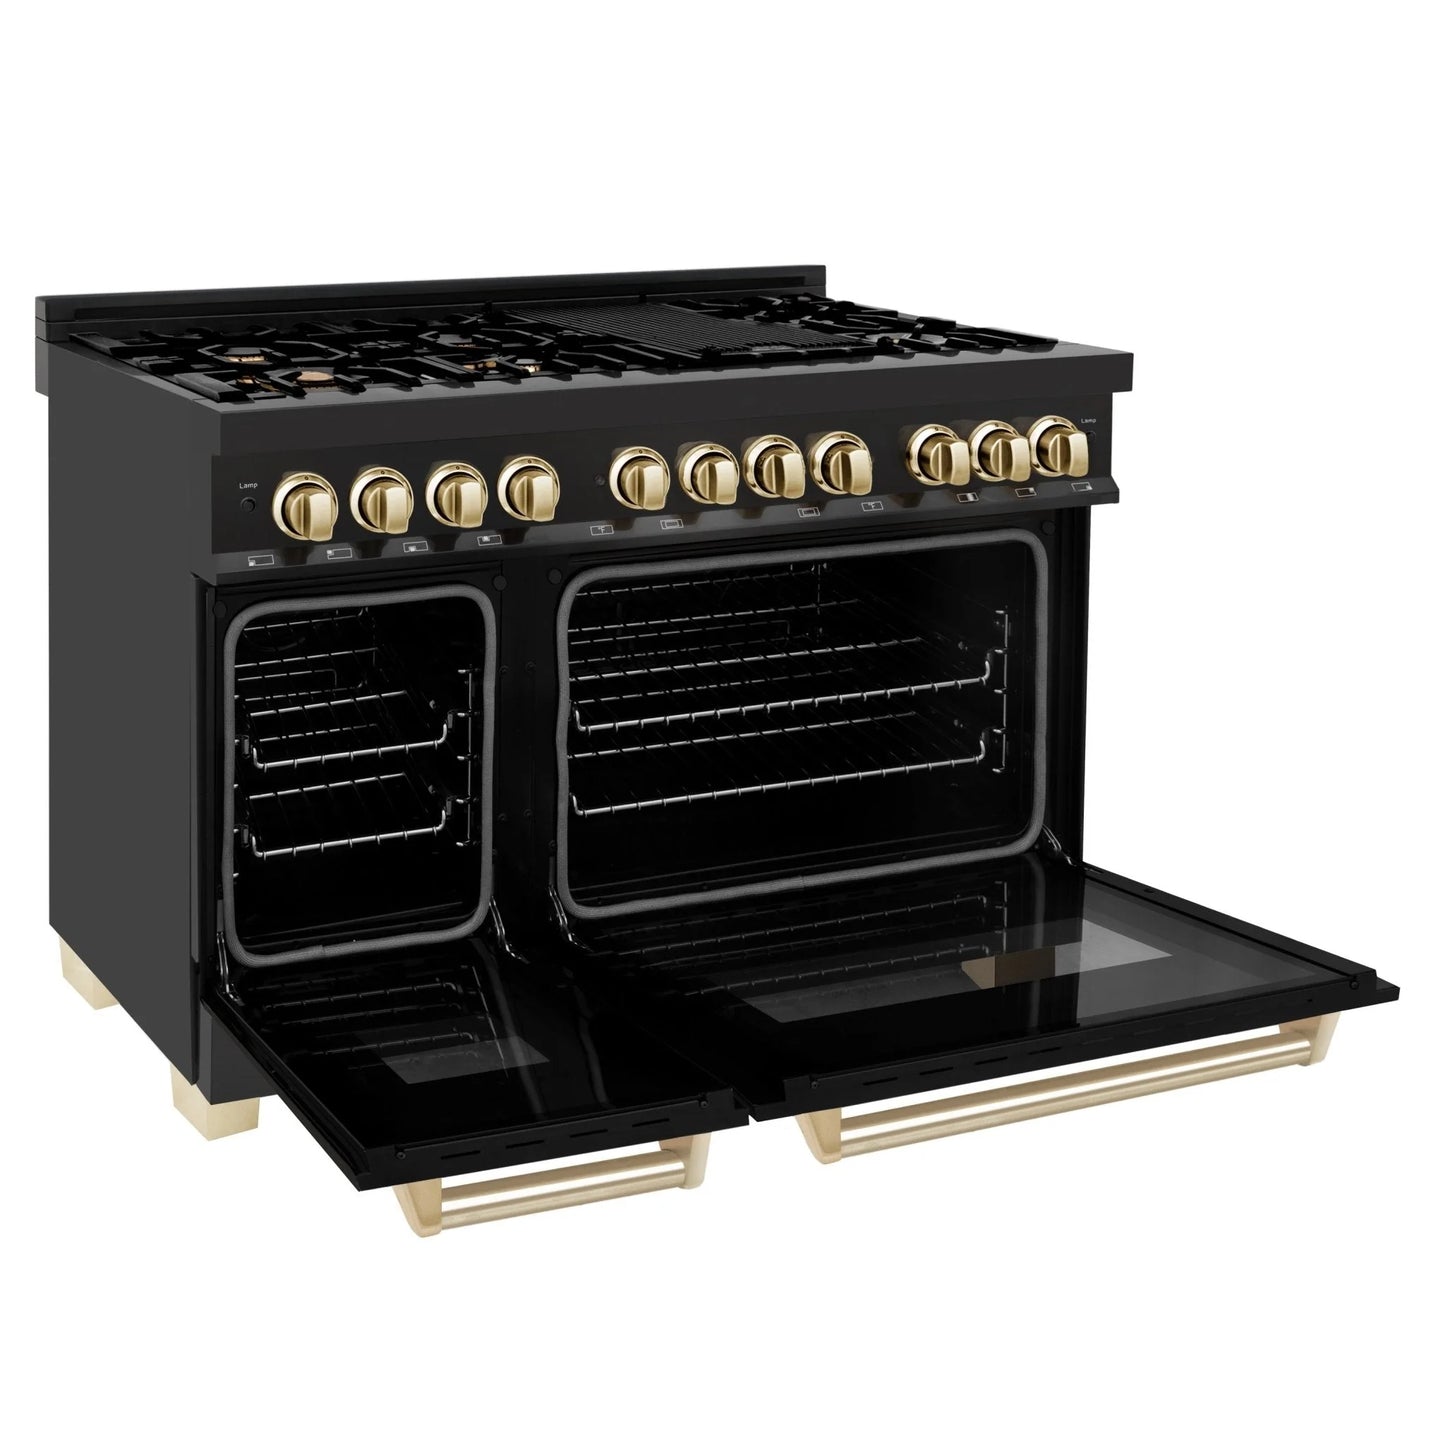 ZLINE Autograph Edition 48 in. Dual Fuel Range with Gas Stove and Electric Oven in Black Stainless Steel with Gold Accents (RABZ-48-G)